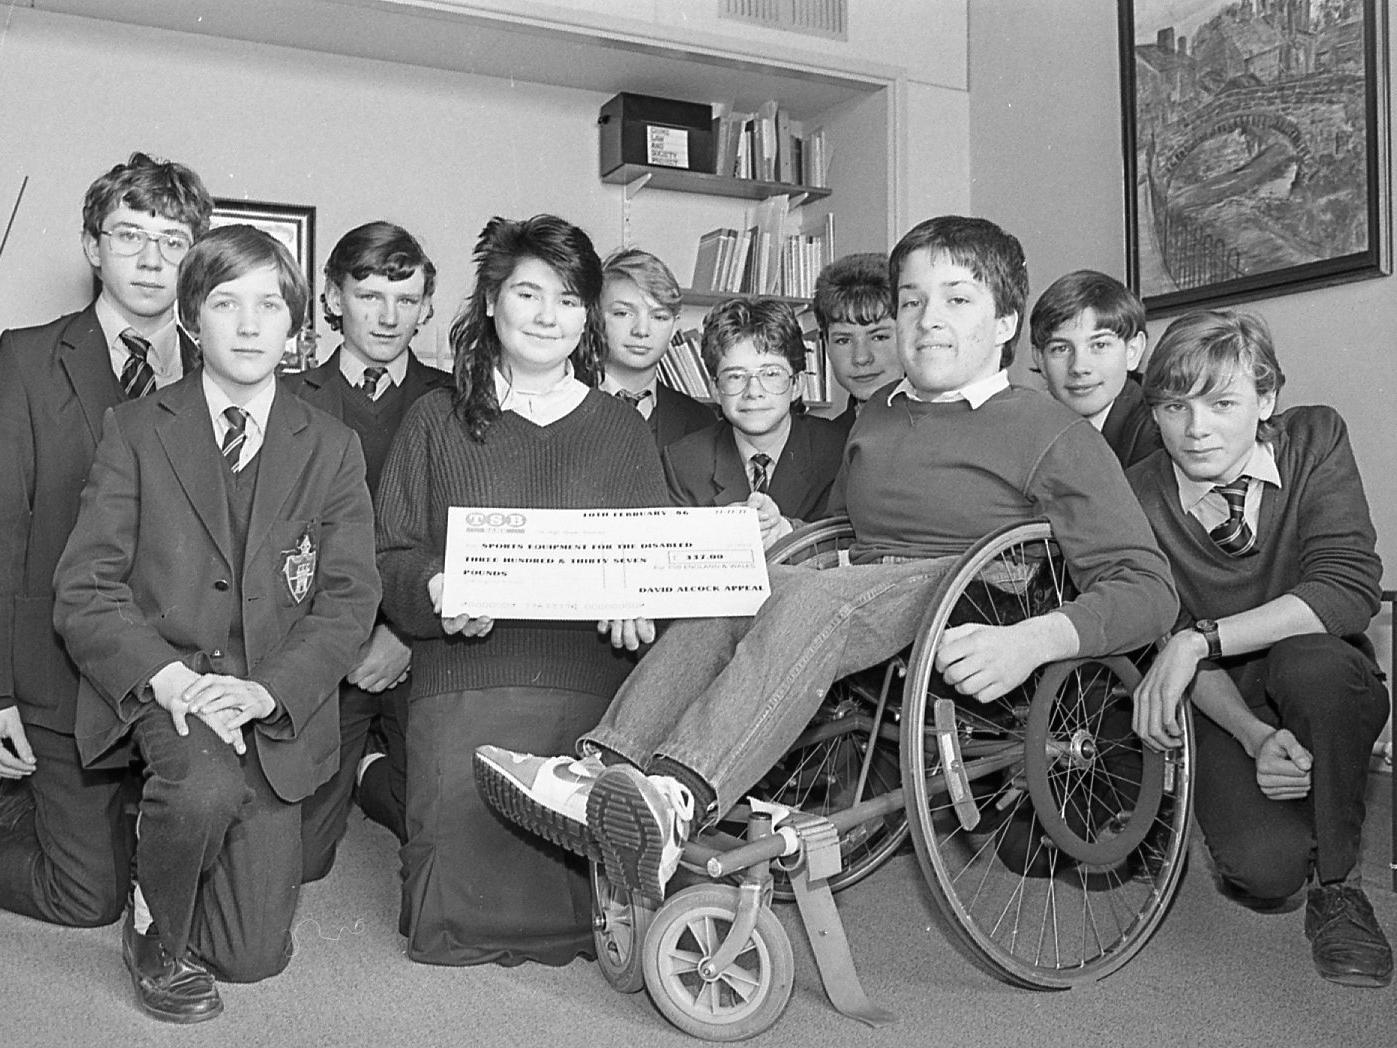 Pupils at Bishop Rawstorne High school at Croston, near Chorley, proved 'good buddies' to disabled sportsman 14-year-old David Alcock when they raised more than 400 in a sponsored CB radio marathon. Nearly 40 people joined a 12-hour non-stop talk-in on Citizen's Band Radio to help David buy a special high-speed wheelchair